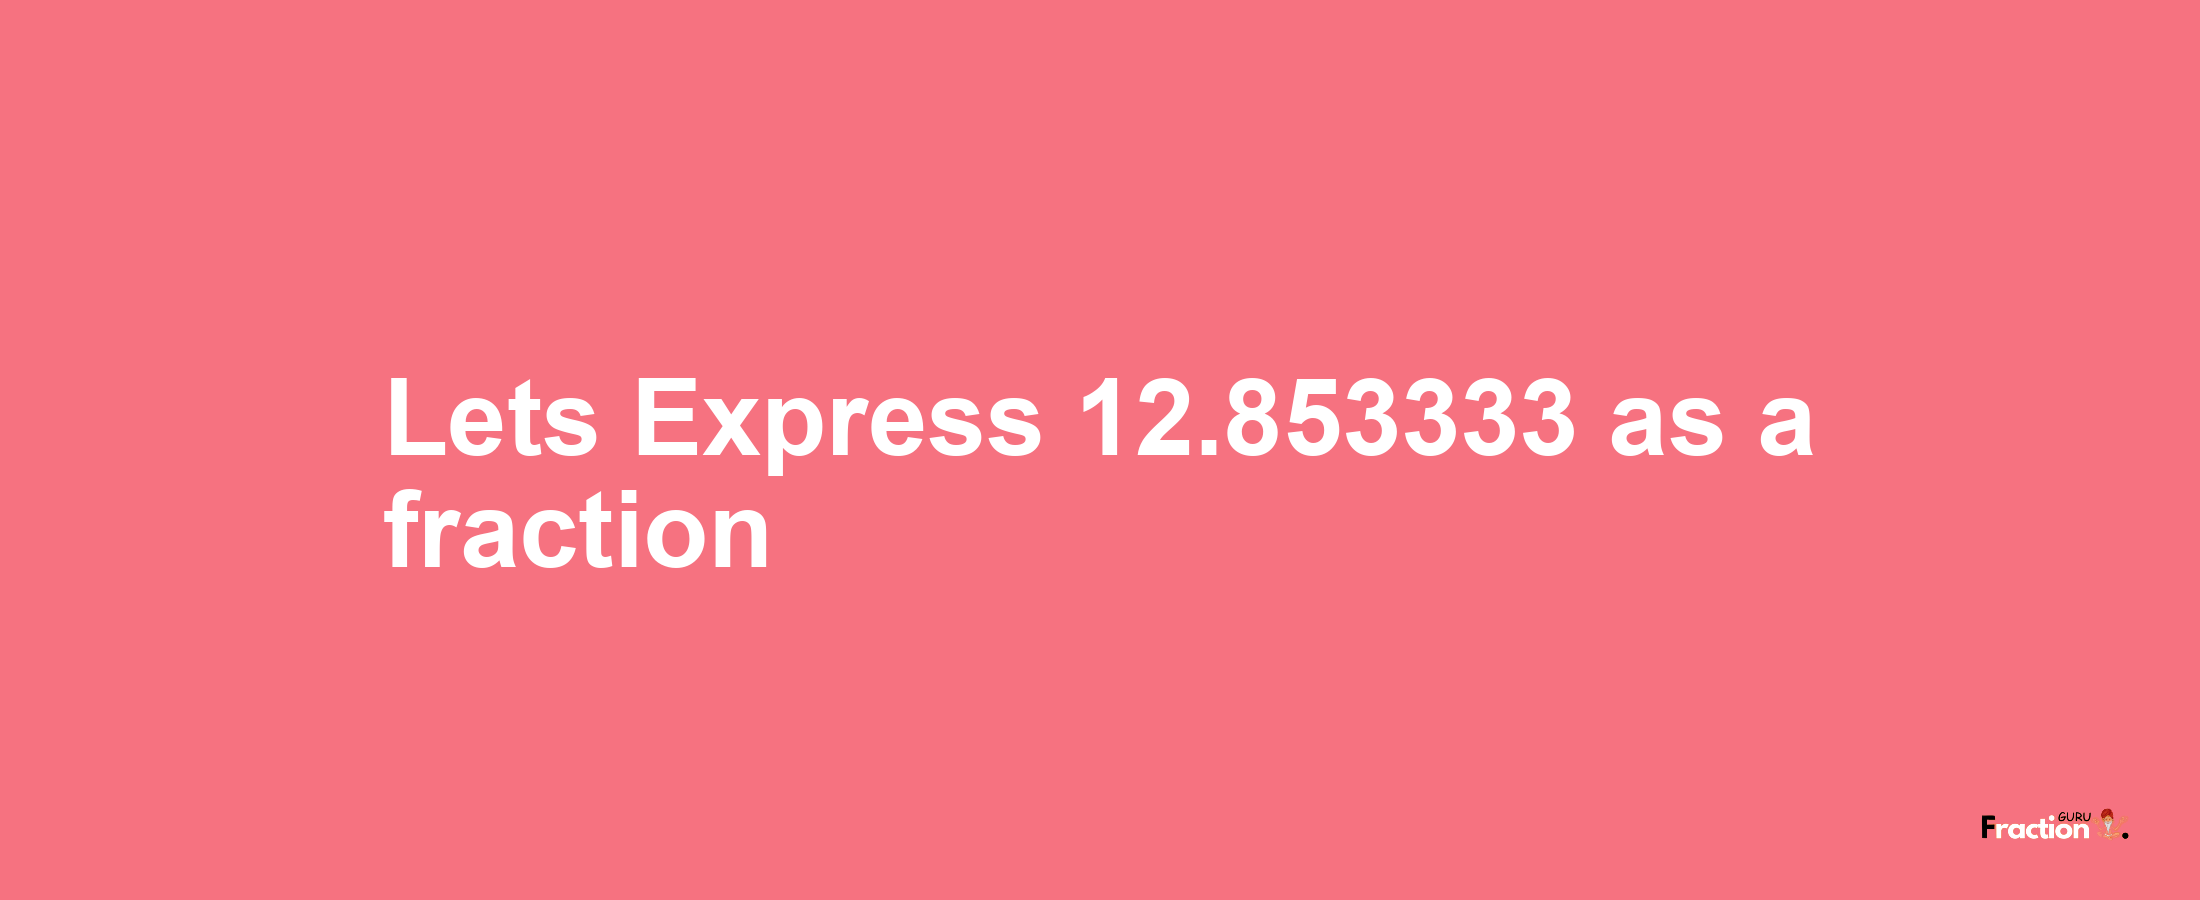 Lets Express 12.853333 as afraction